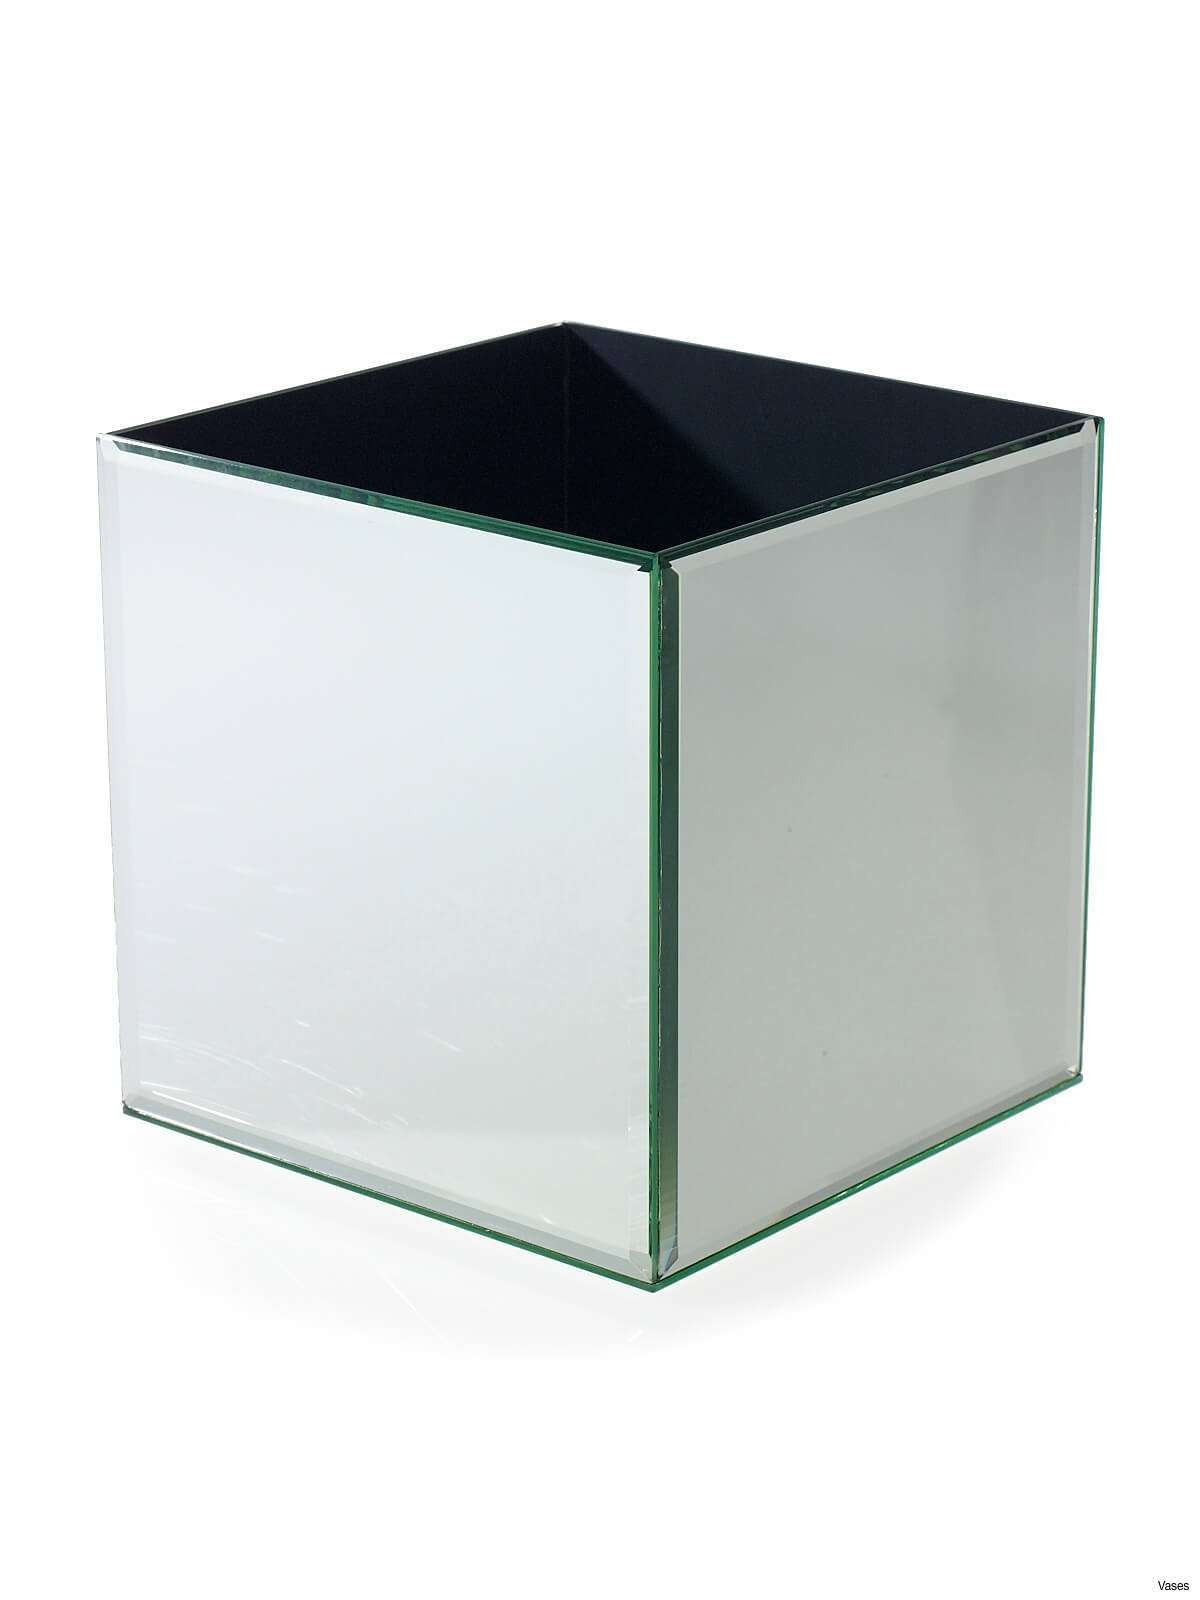 11 attractive 4x4 Square Vase 2024 free download 4x4 square vase of 8 elegant wedding reception locations near me fresh my wedding ideas with regard to wedding reception locations near me luxury mirrored square vase 3h vases mirror wedding